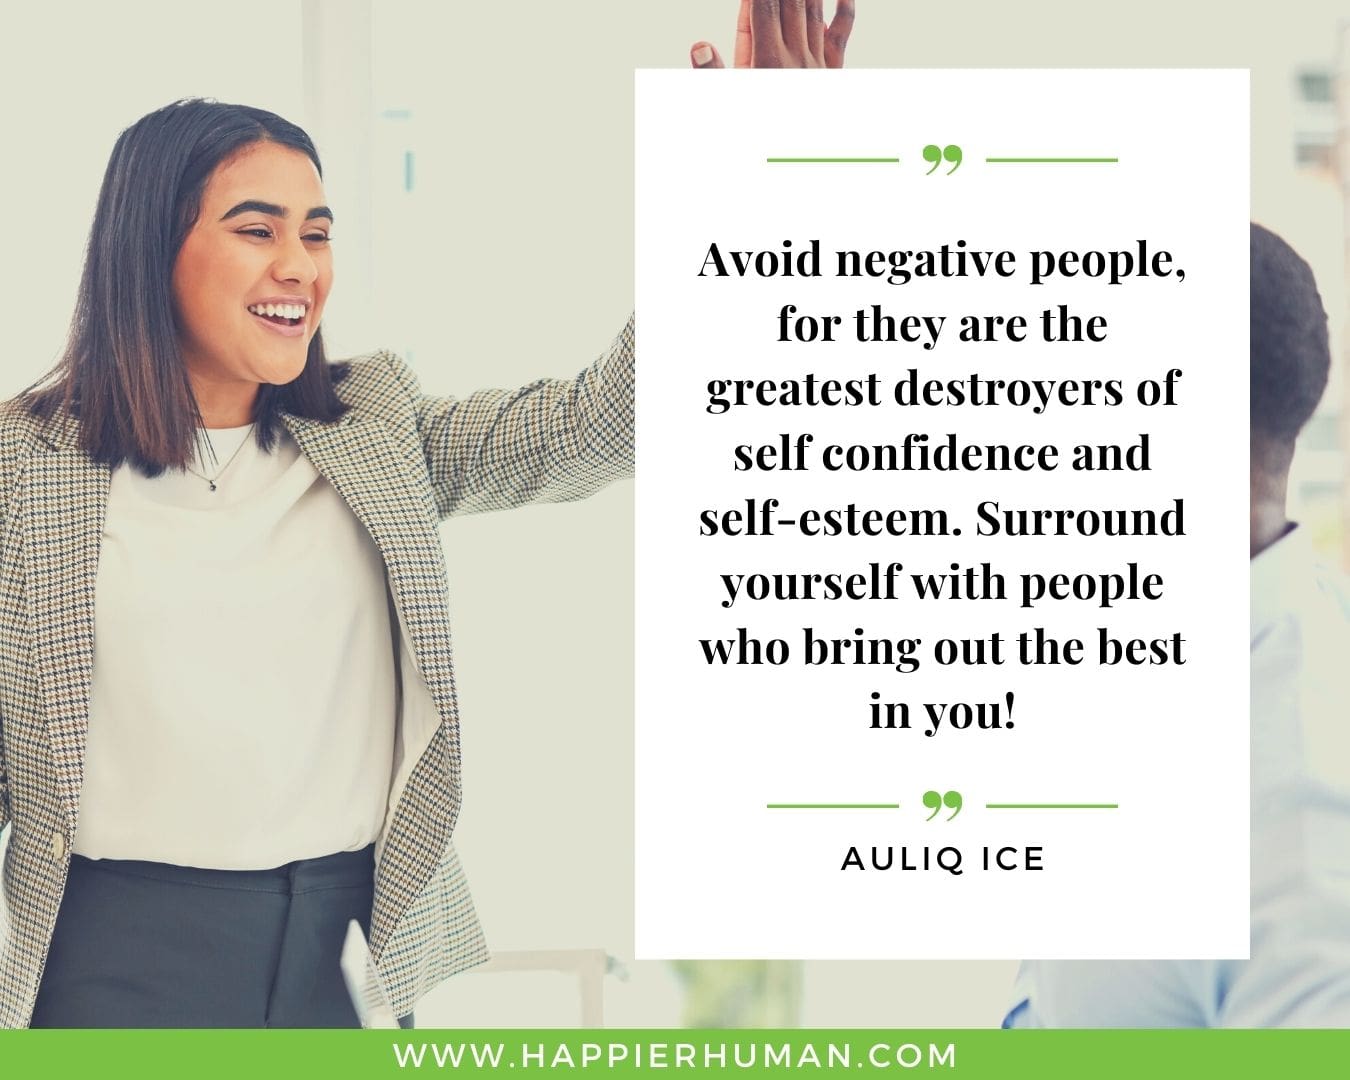 Haters Quotes - “Avoid negative people, for they are the greatest destroyers of self confidence and self-esteem. Surround yourself with people who bring out the best in you!” - Auliq Ice